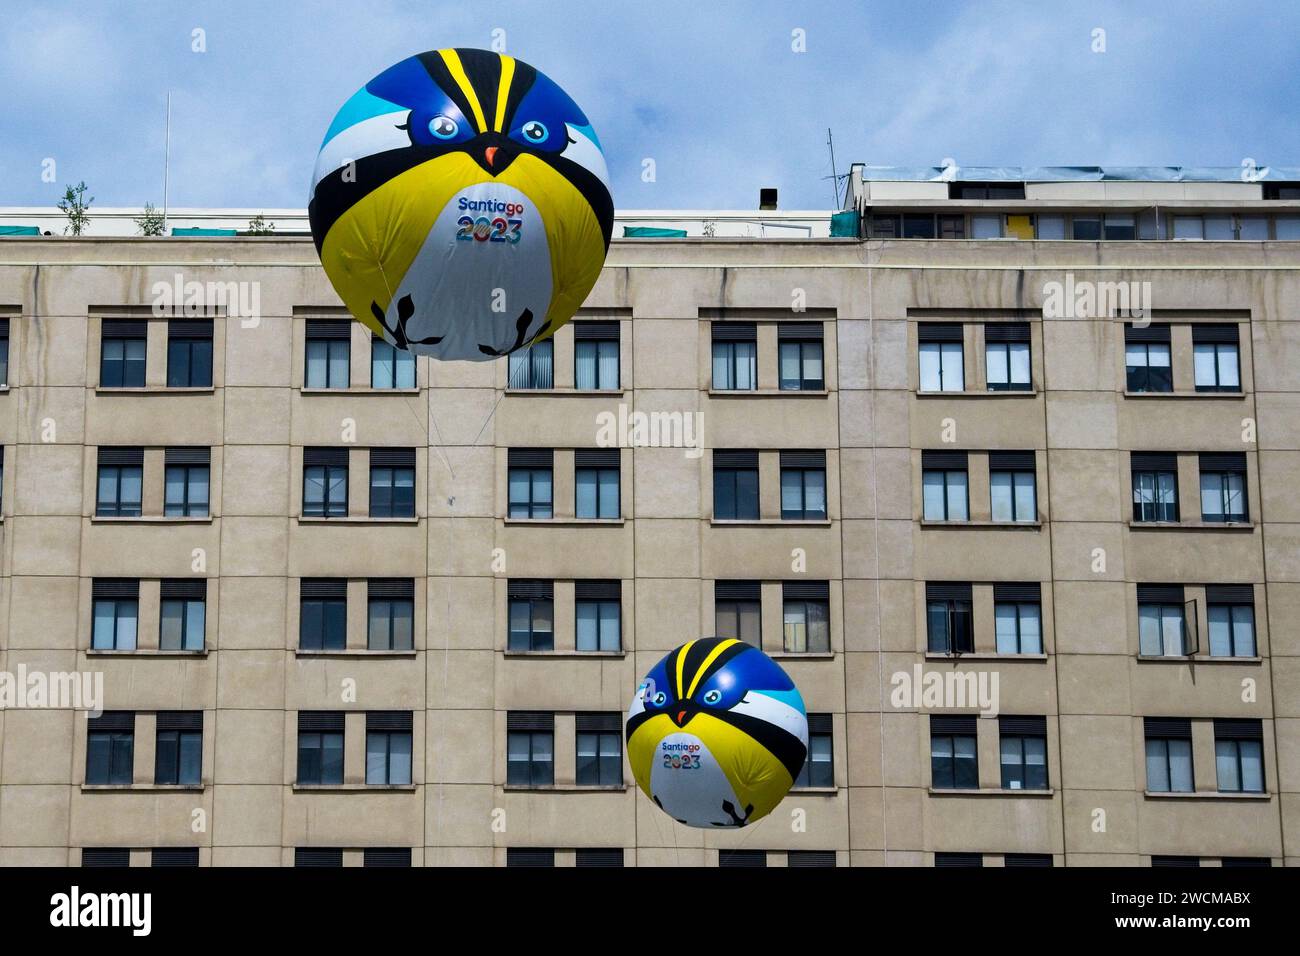 Santiago, Chile, Floating in Plaza de la Ciudadan’a is an Inflatable Fiu, Official Mascot of Santiago 2023 Parapan American Games, Stock Photo